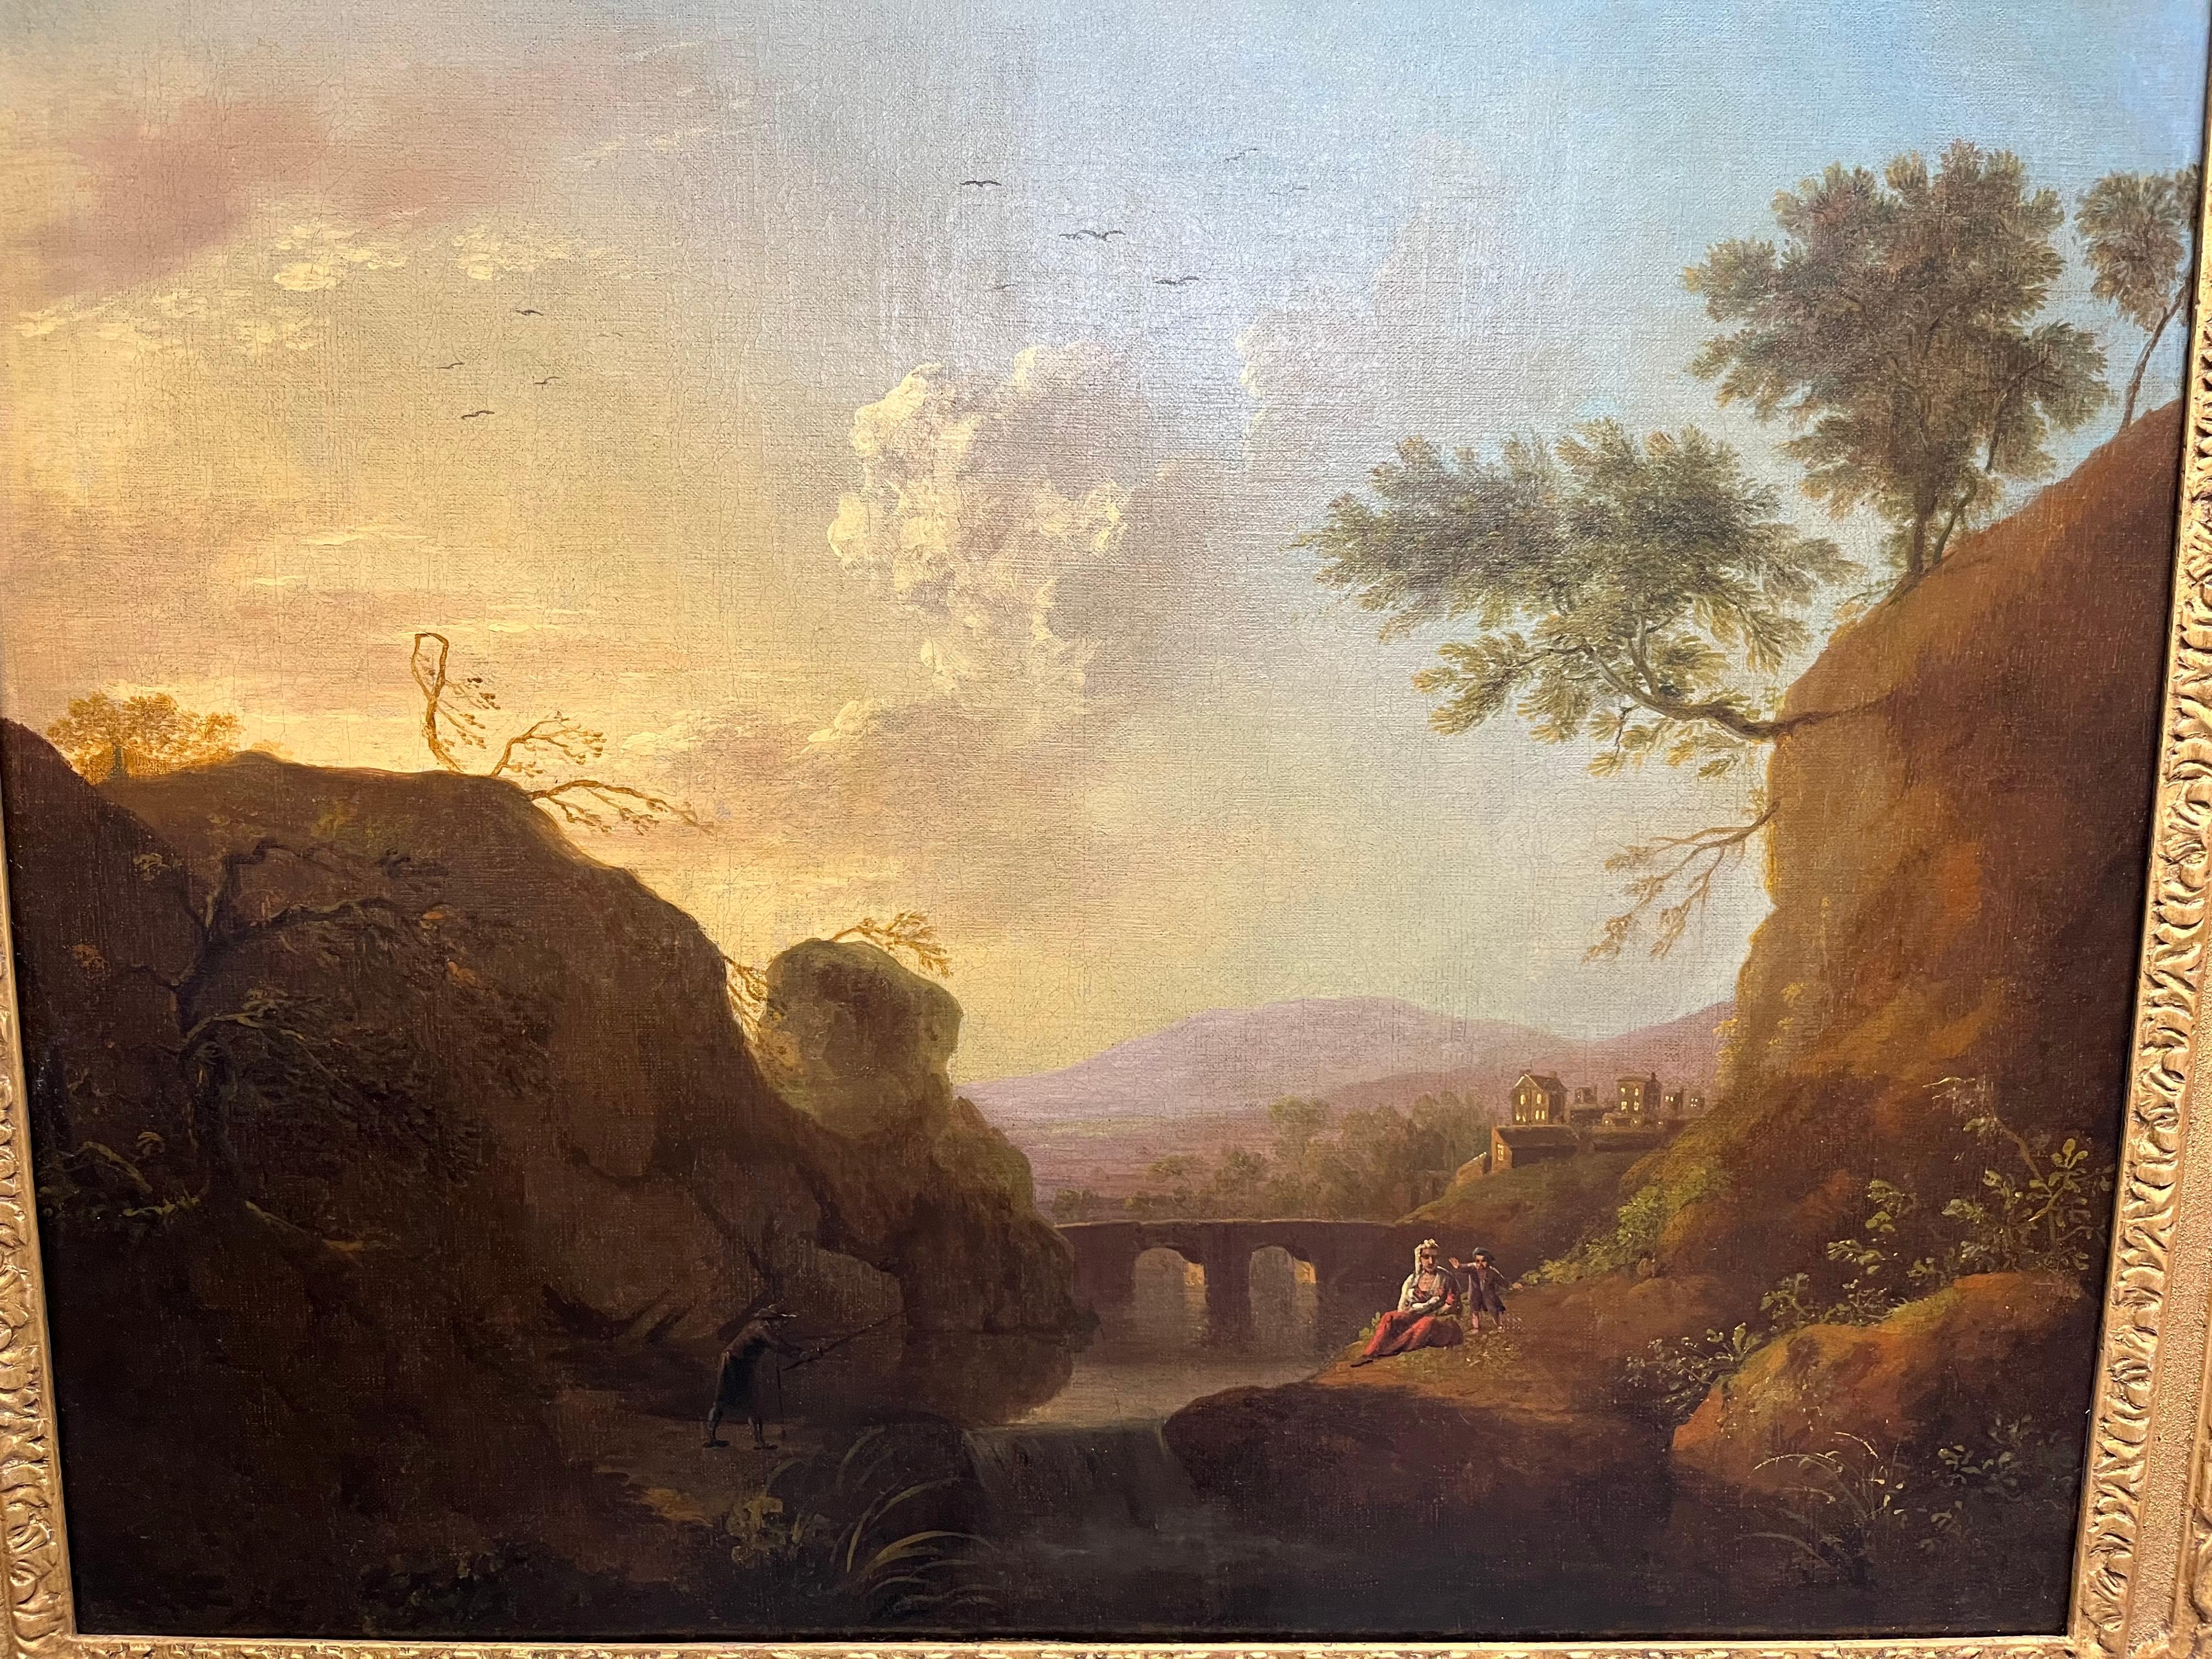 Adriaen van Diest (1655-1704)
Classical landscape with figures resting and a gentleman fishing before a viaduct
Oil on canvas
Canvas Size - 24 1/2 x 30 in
Framed Size - 32 x 37 in

Provenance
The Collection of The Rt. Hon. The Earl of Castle Stewart